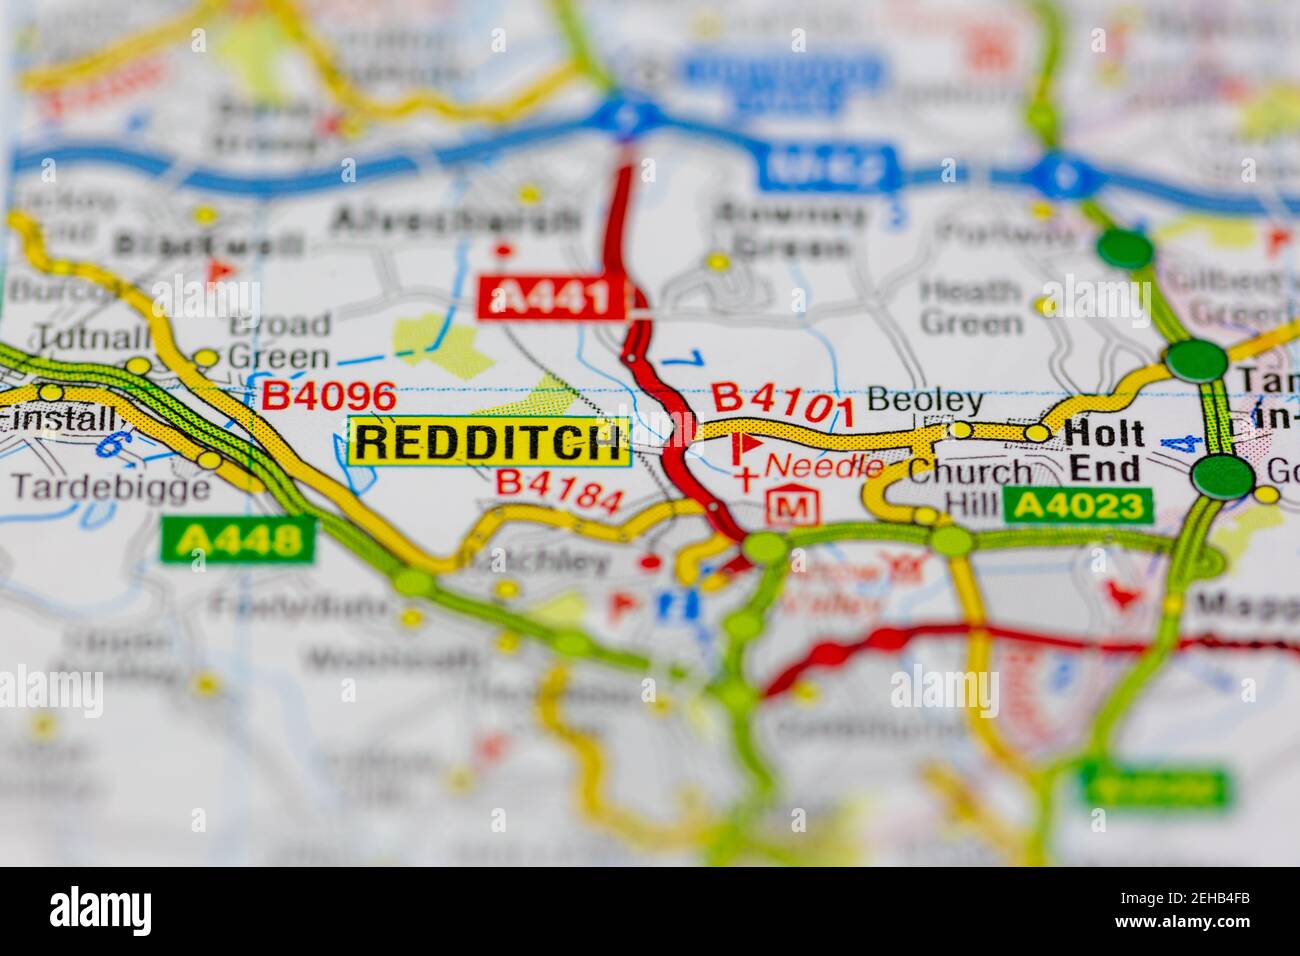 Redditch and surrounding areas shown on a road map or Geography map Stock Photo